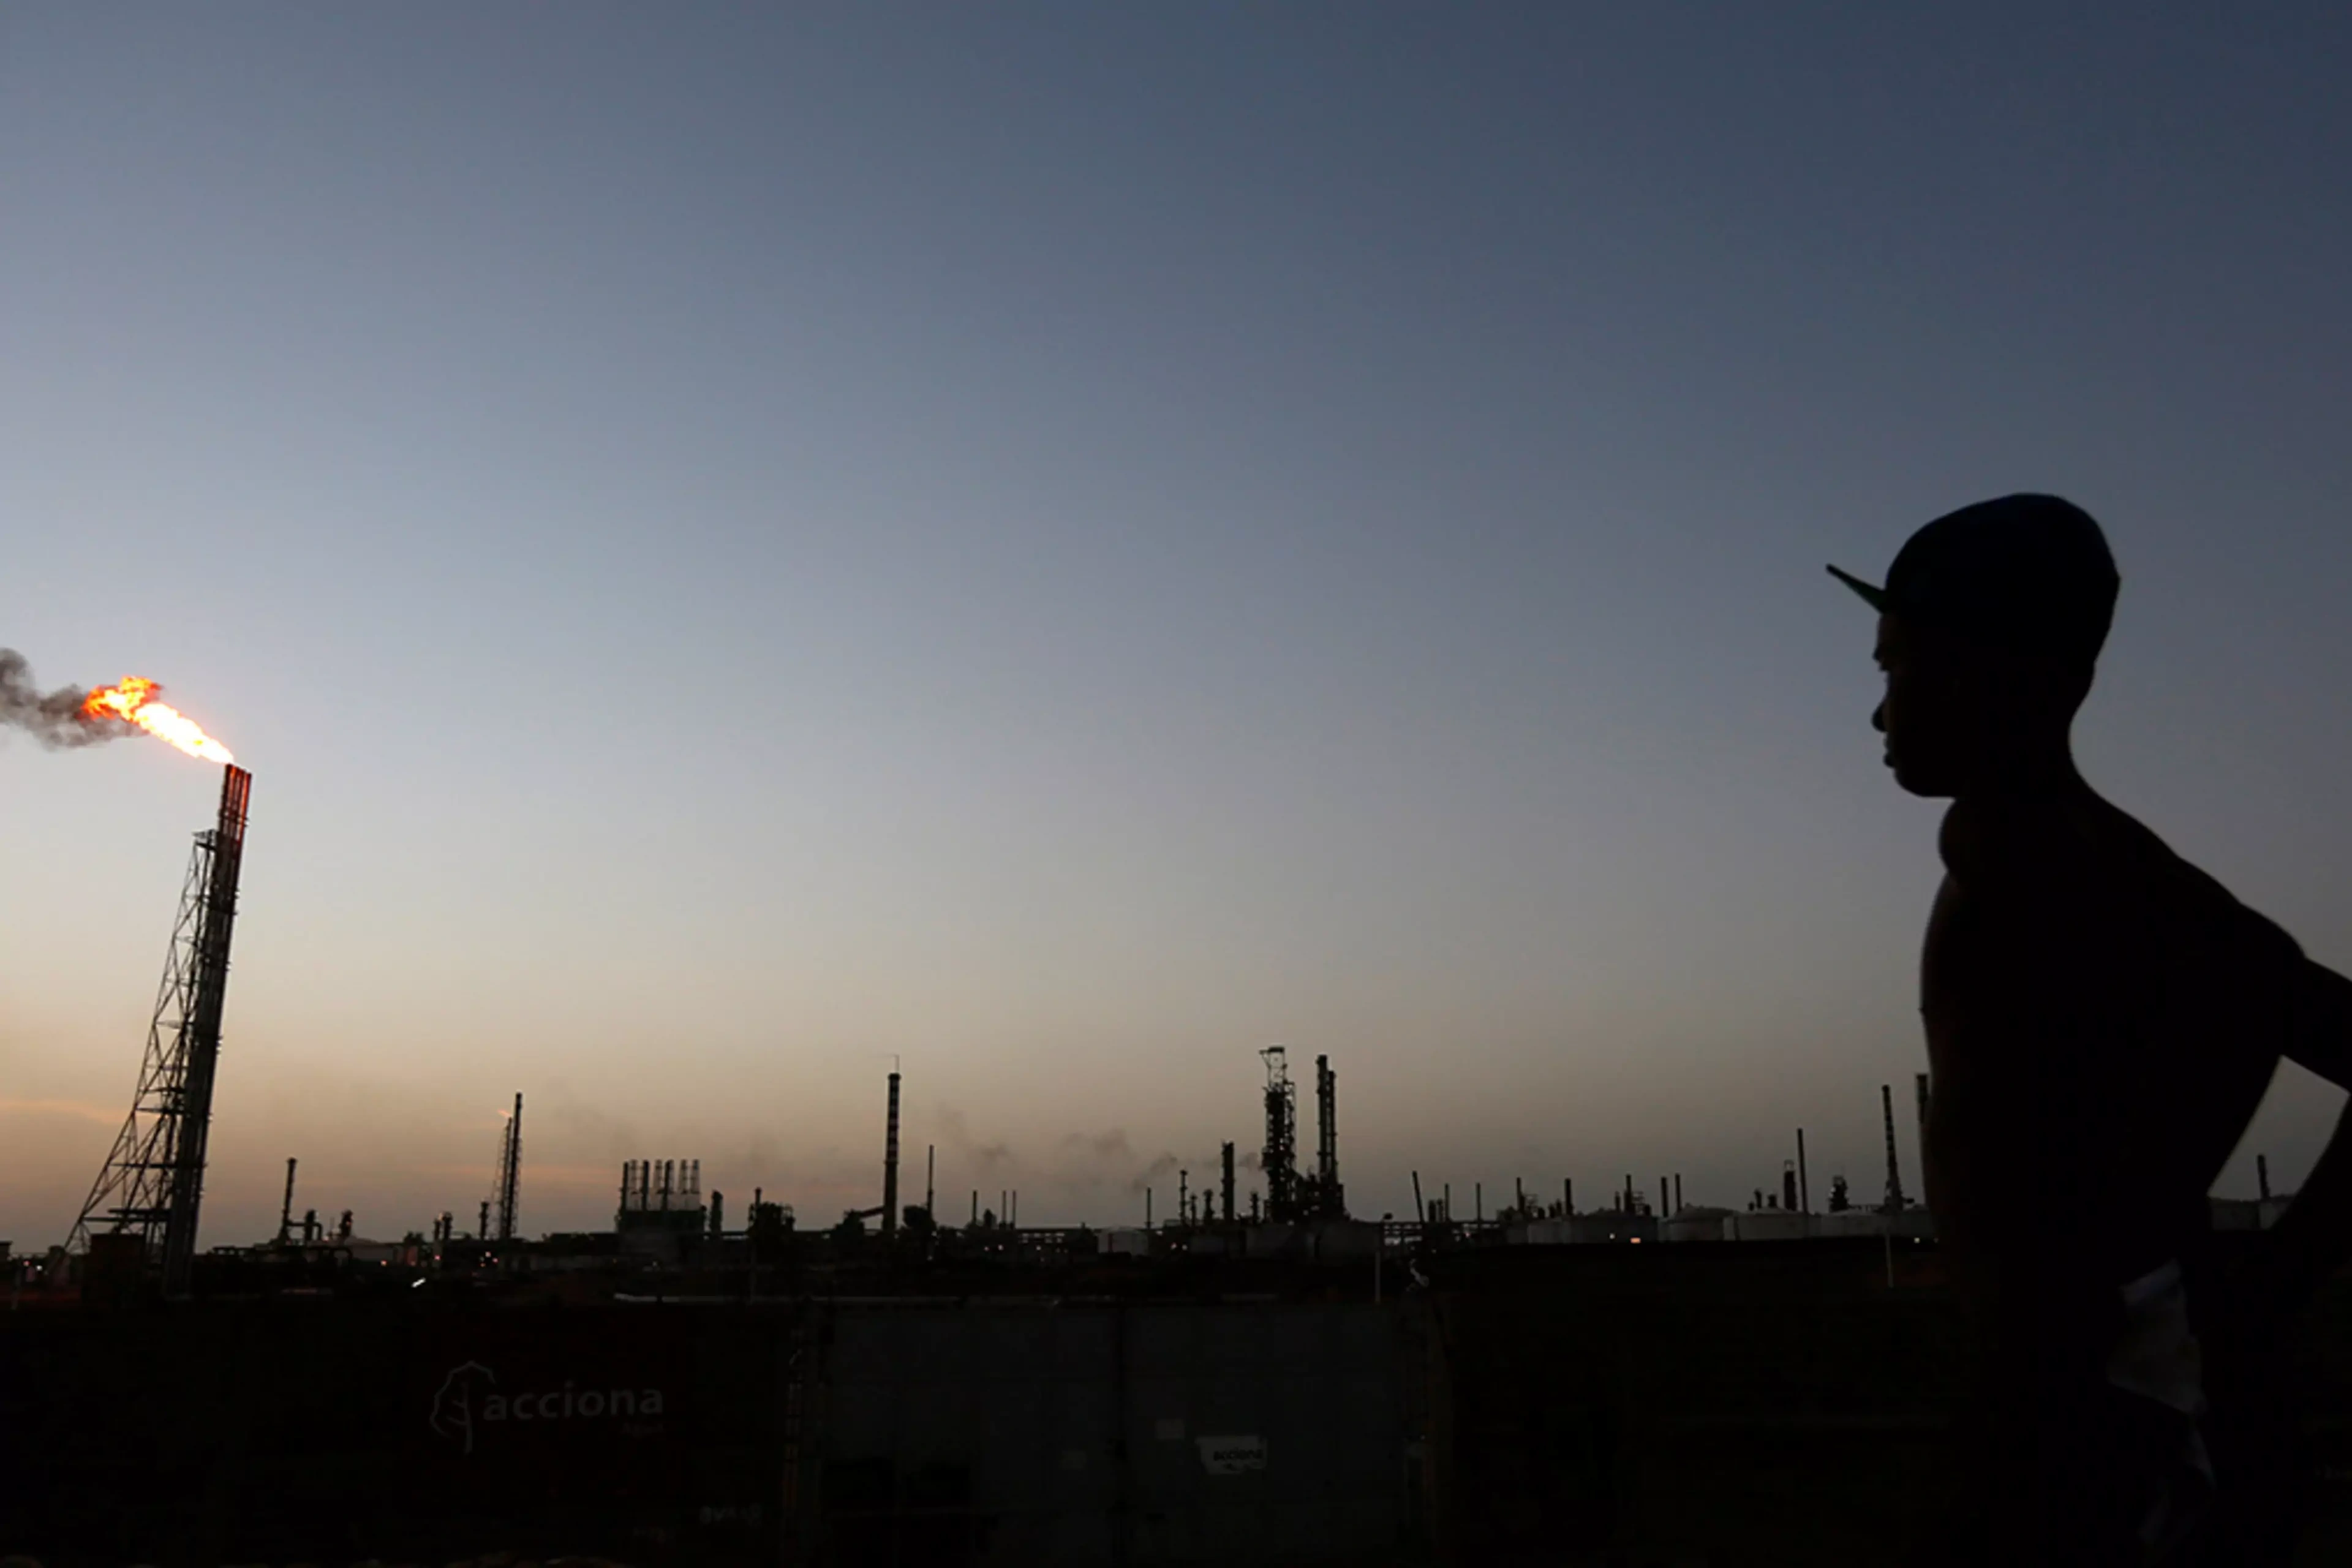 A man stands near a state-owned refinery in Punto Fijo, Venezuela.